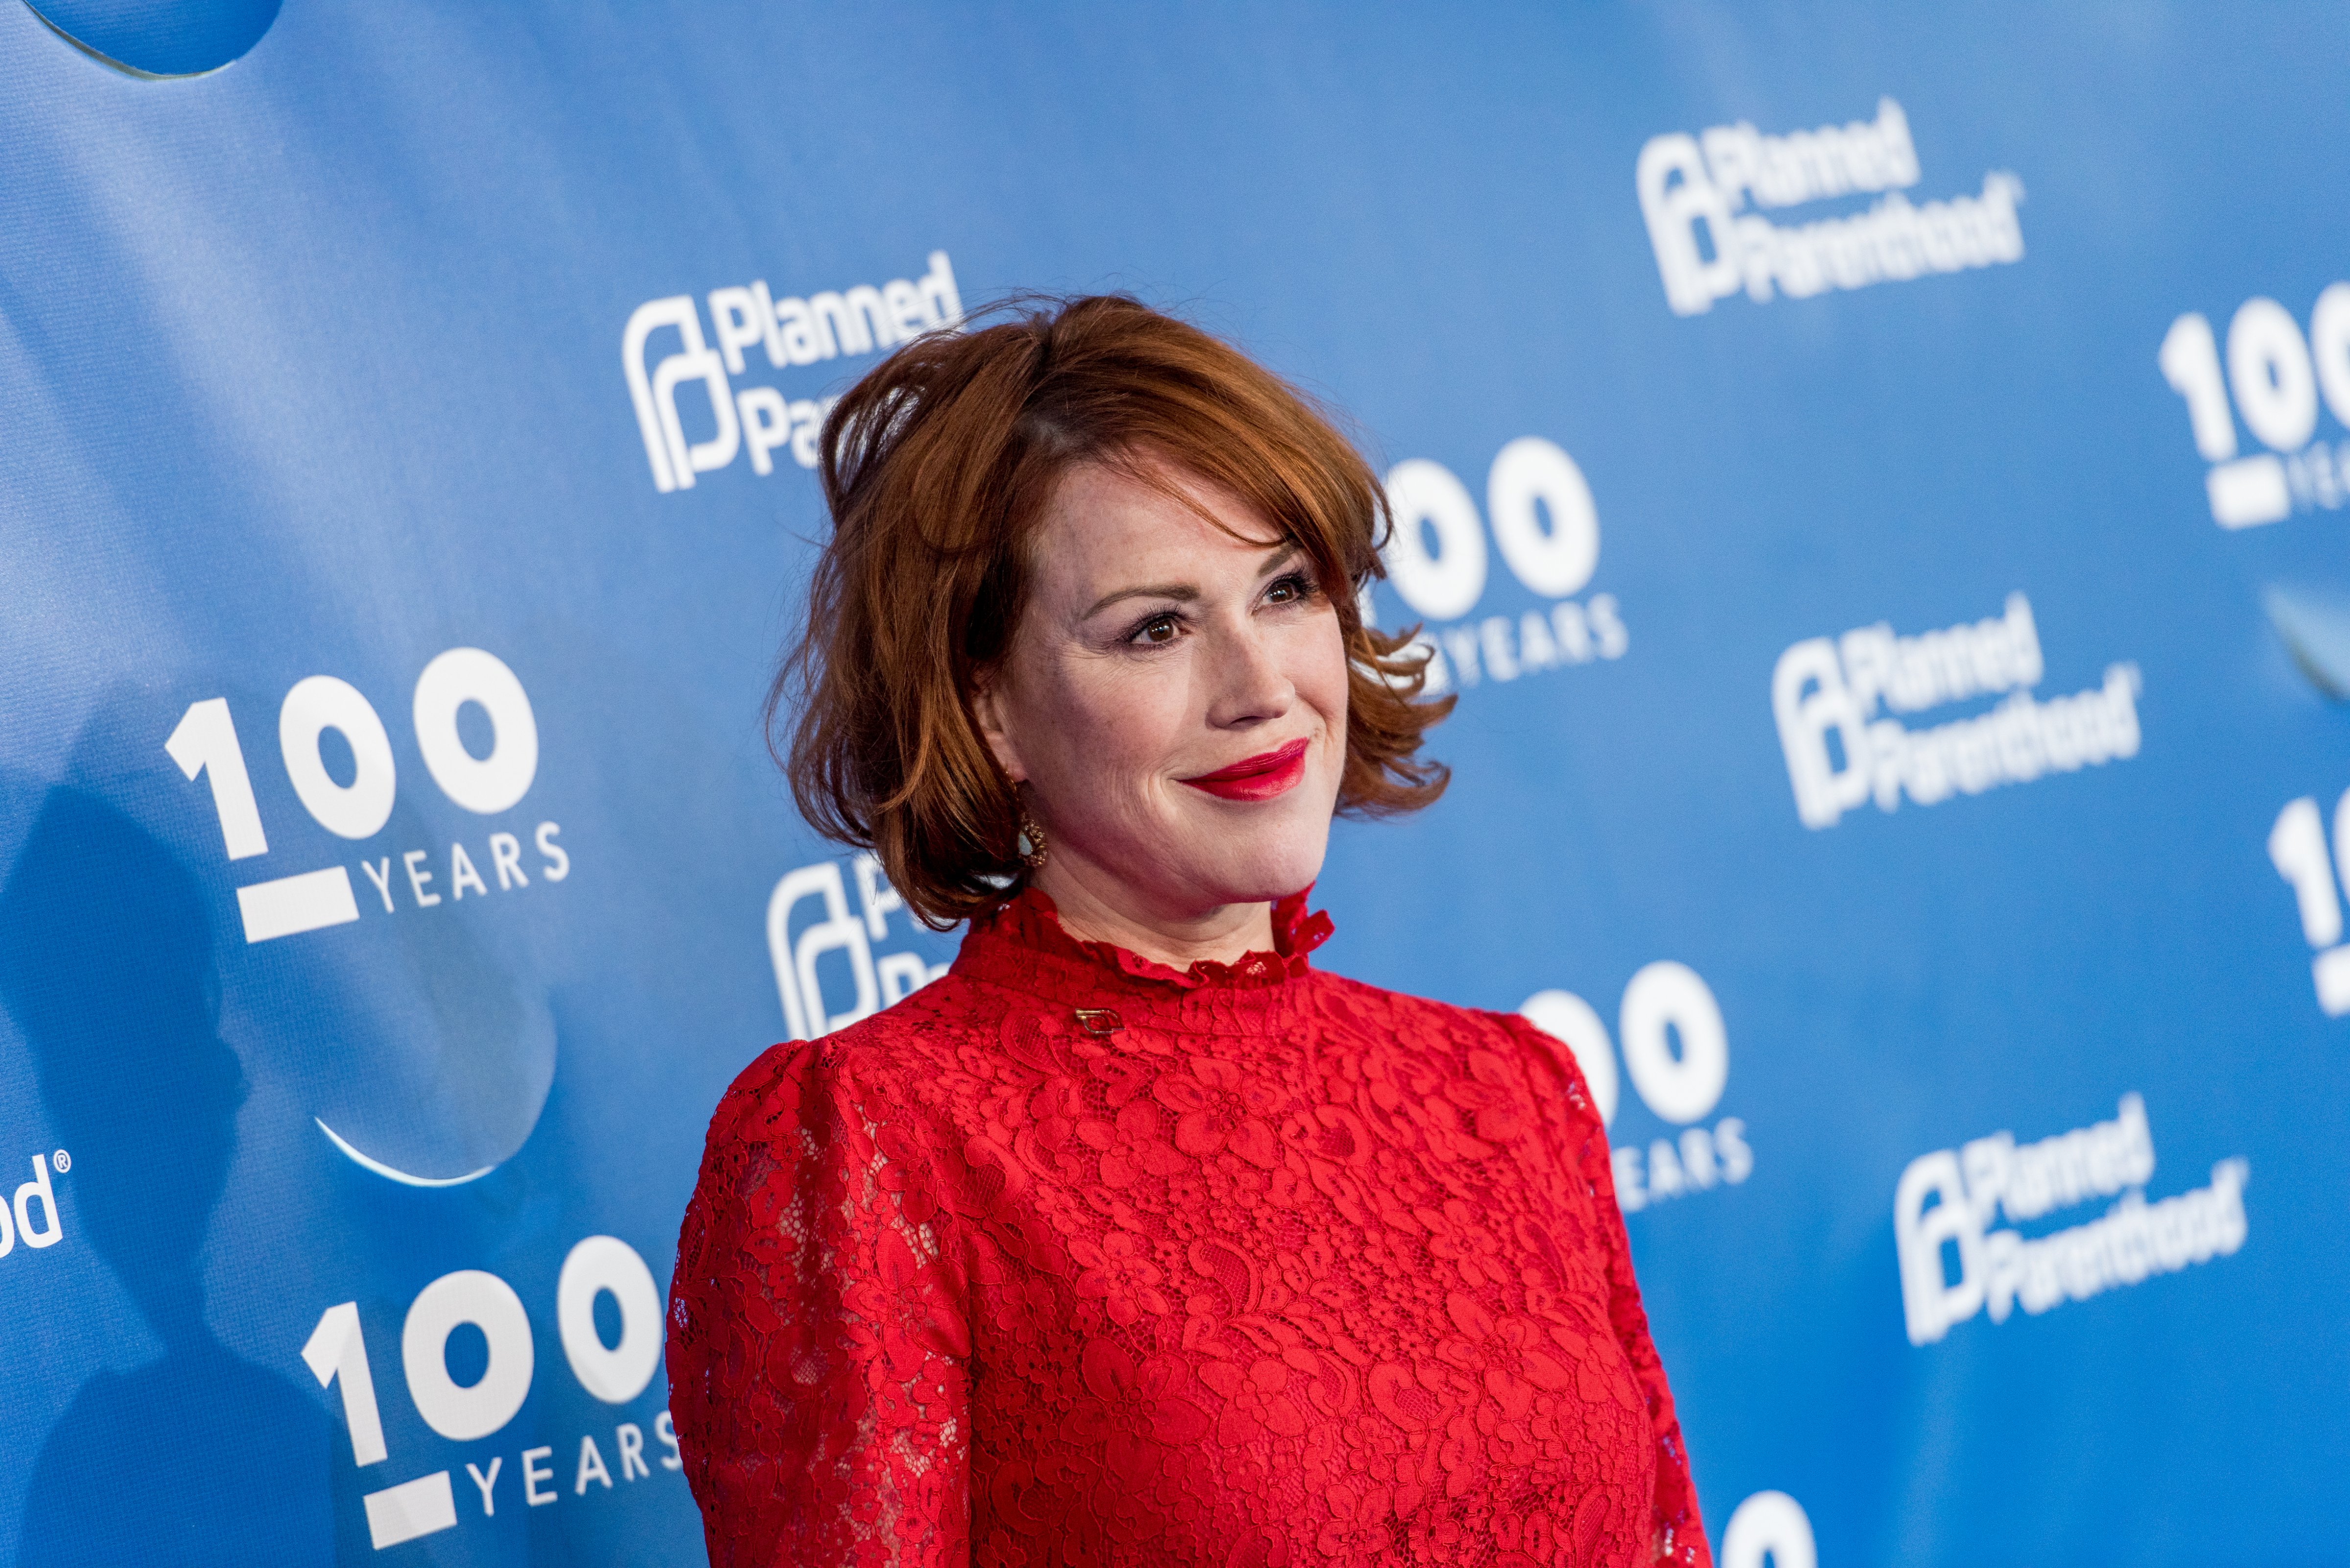 Molly Ringwald attends the Planned Parenthood 100th Anniversary Gala at Pier 36 on May 2, 2017 in New York City. (Roy Rochlin/FilmMagic)